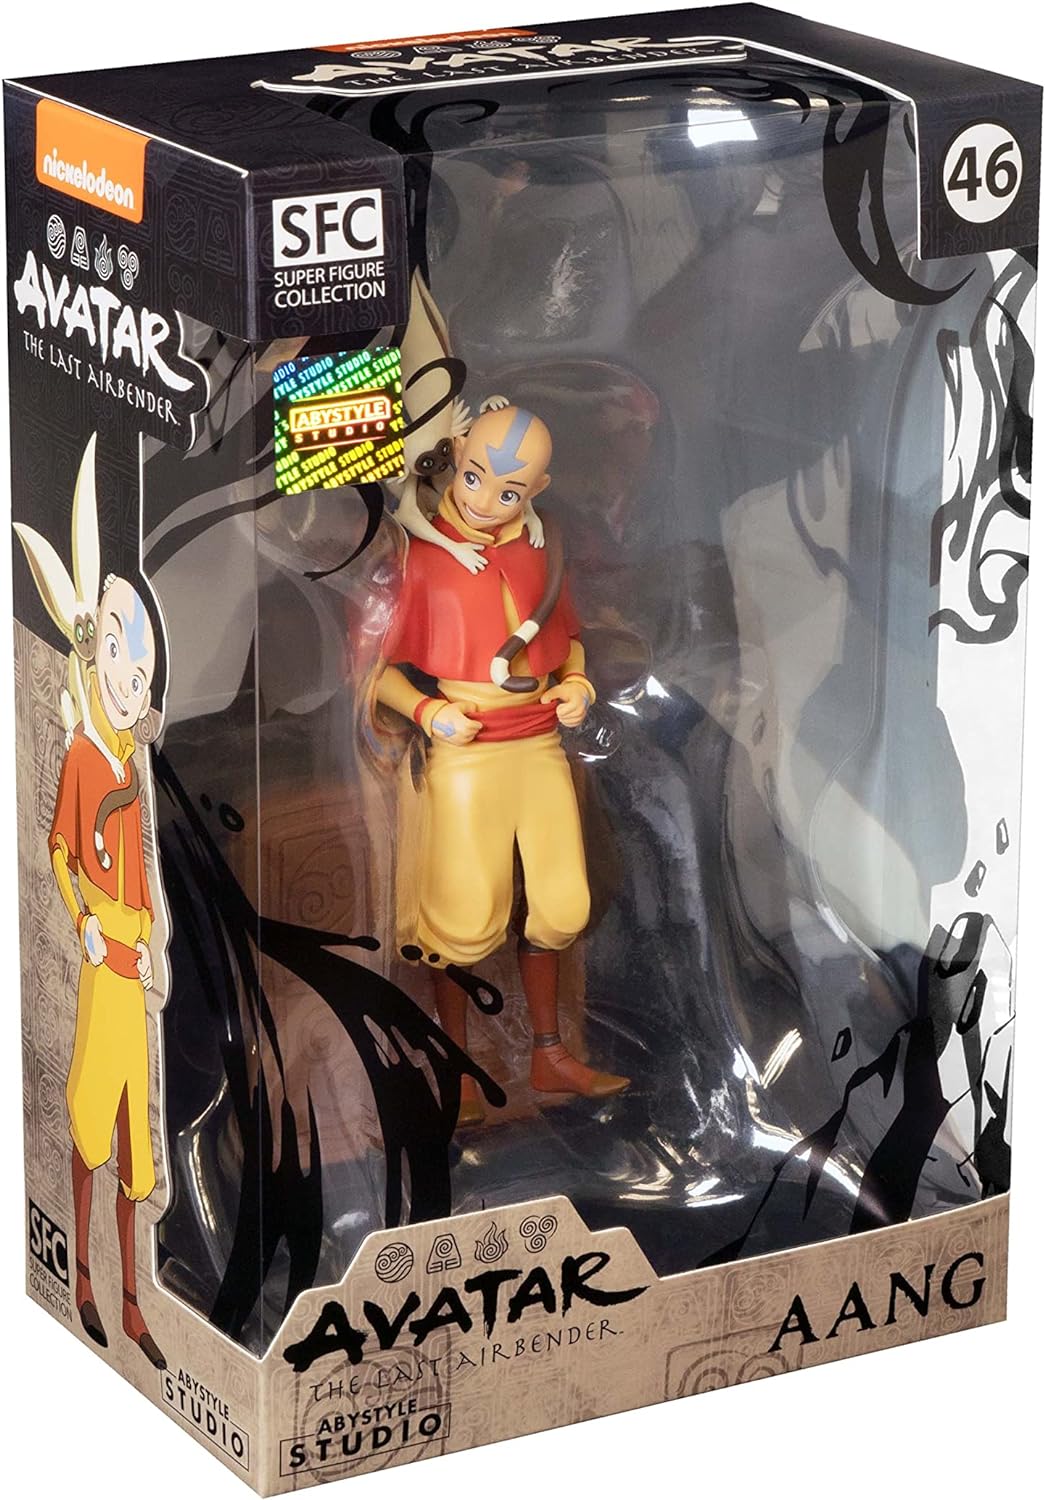 ABYSTYLE Studio Avatar The Last Airbender Aang Collectible PVC Figure Statue 6.3" Tall | CCGPrime